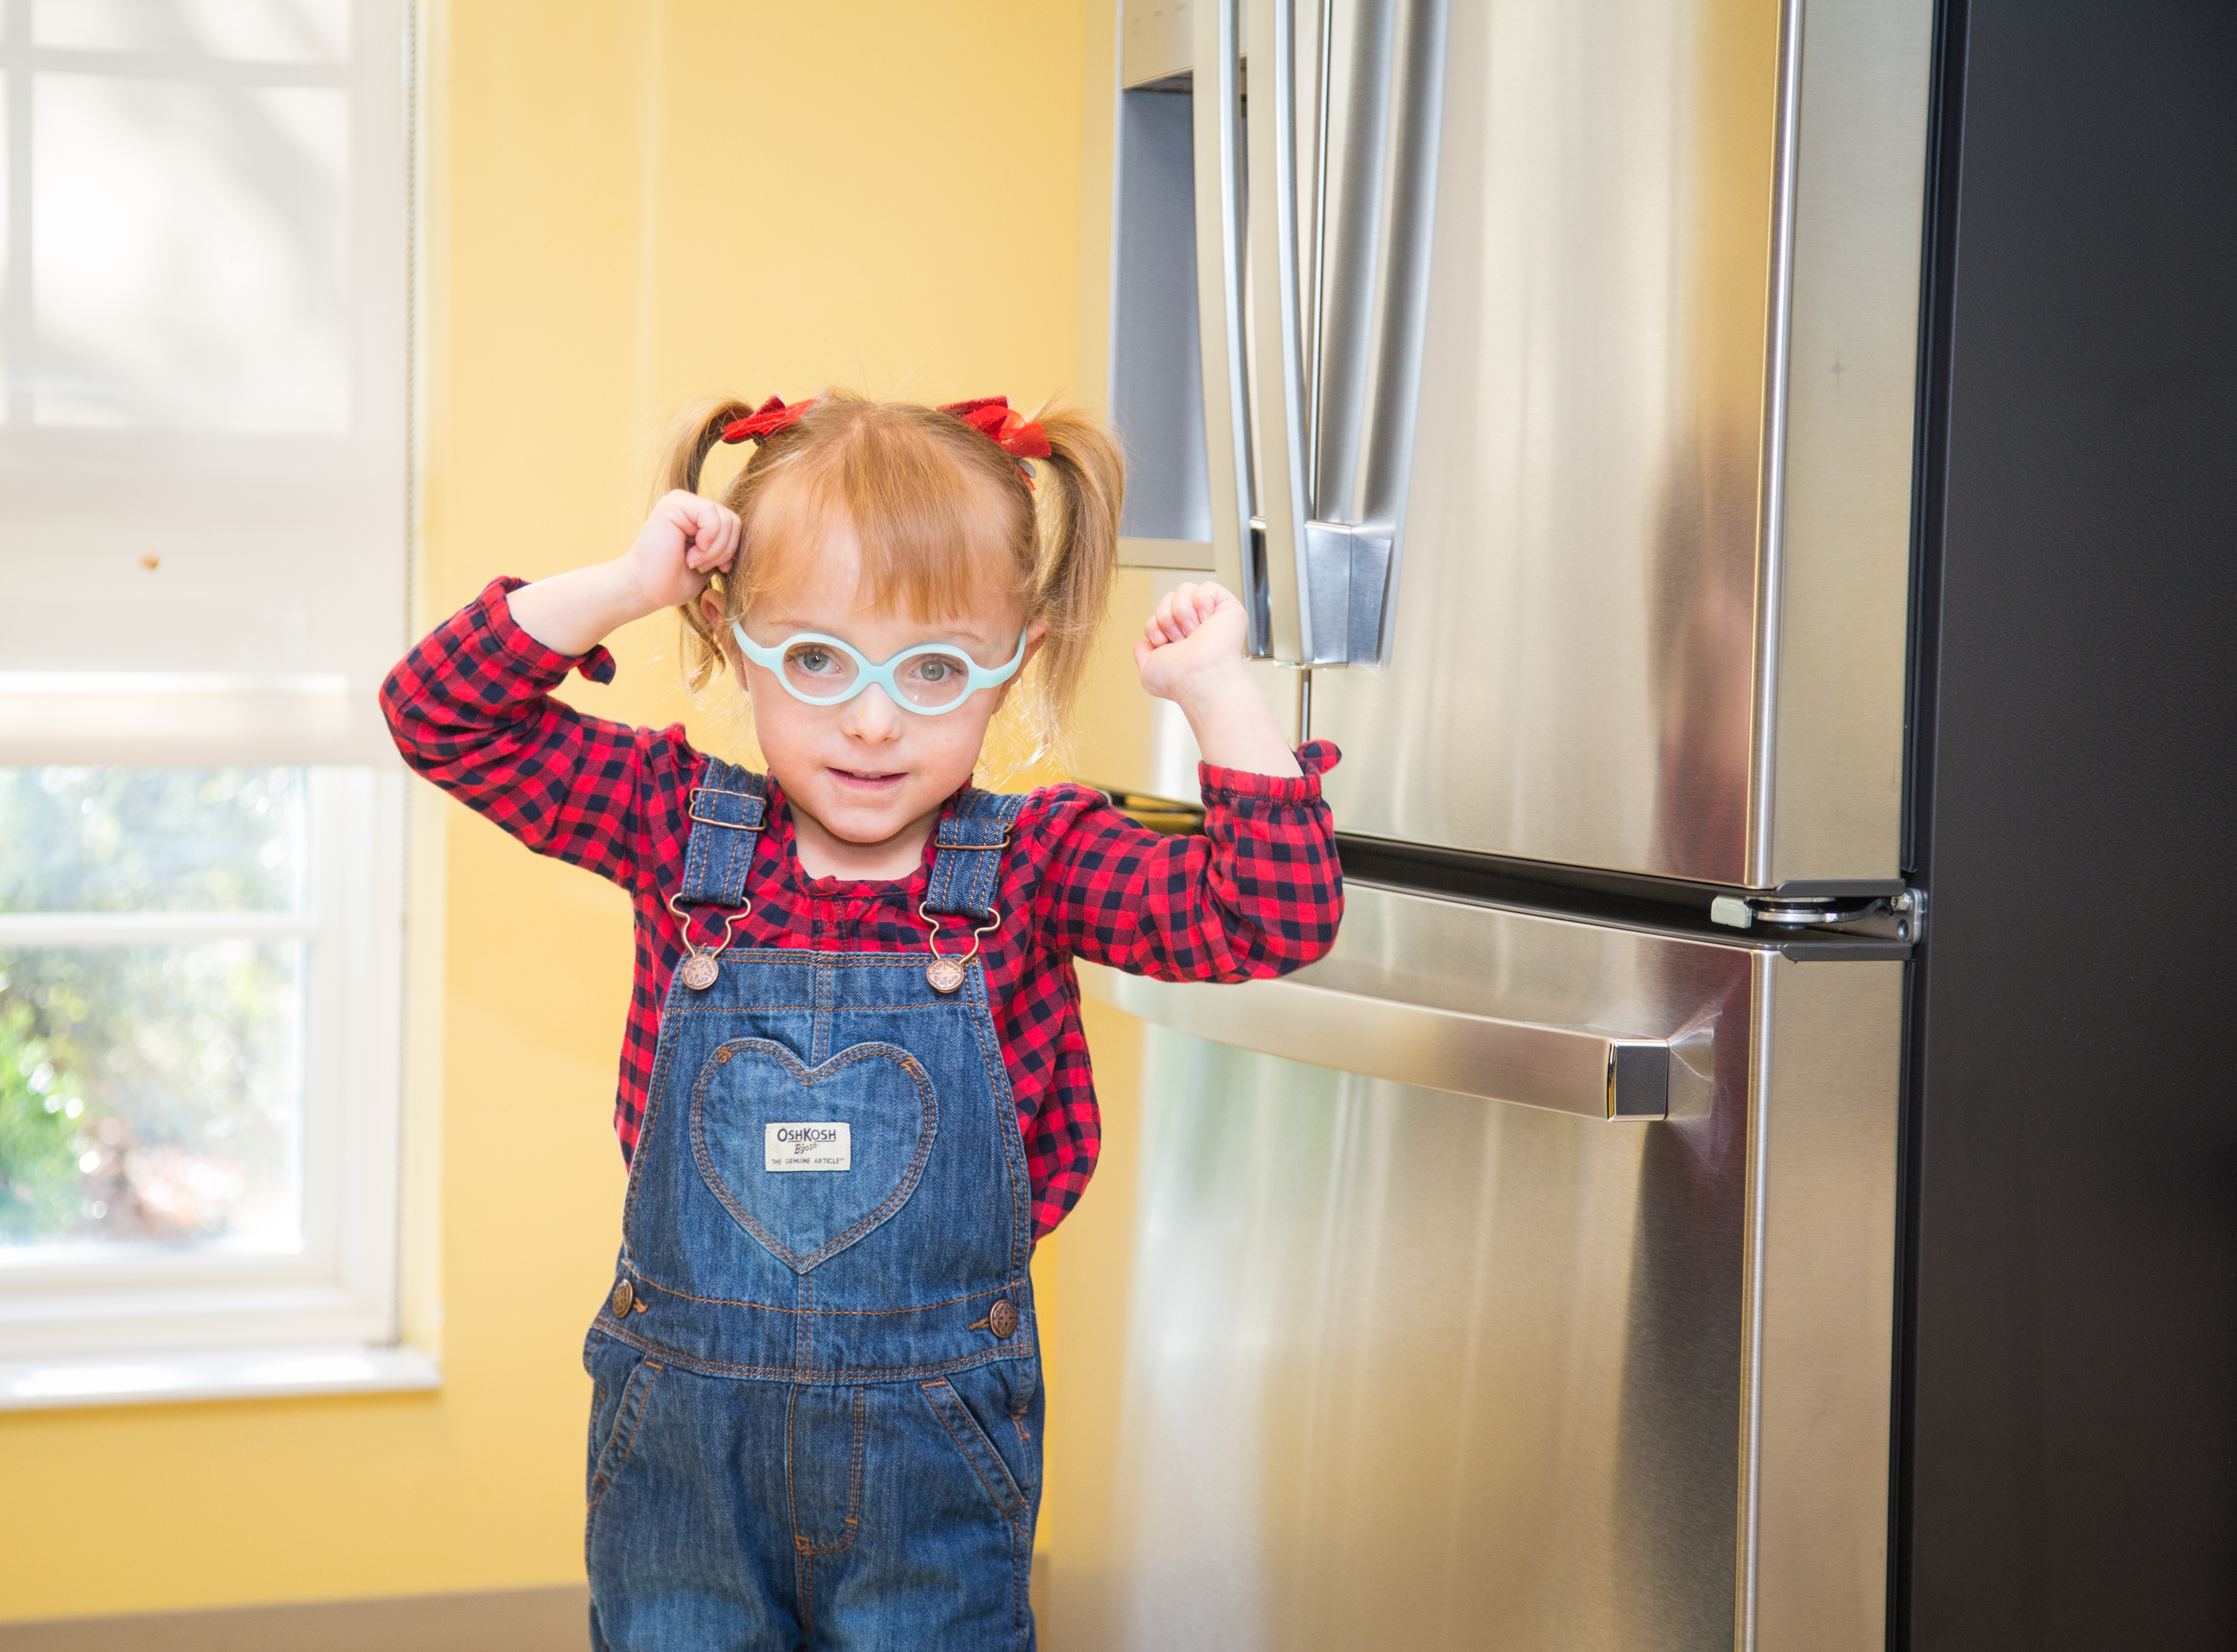 Young girl with glasses flexes her muscles in front of a GE refrigerator